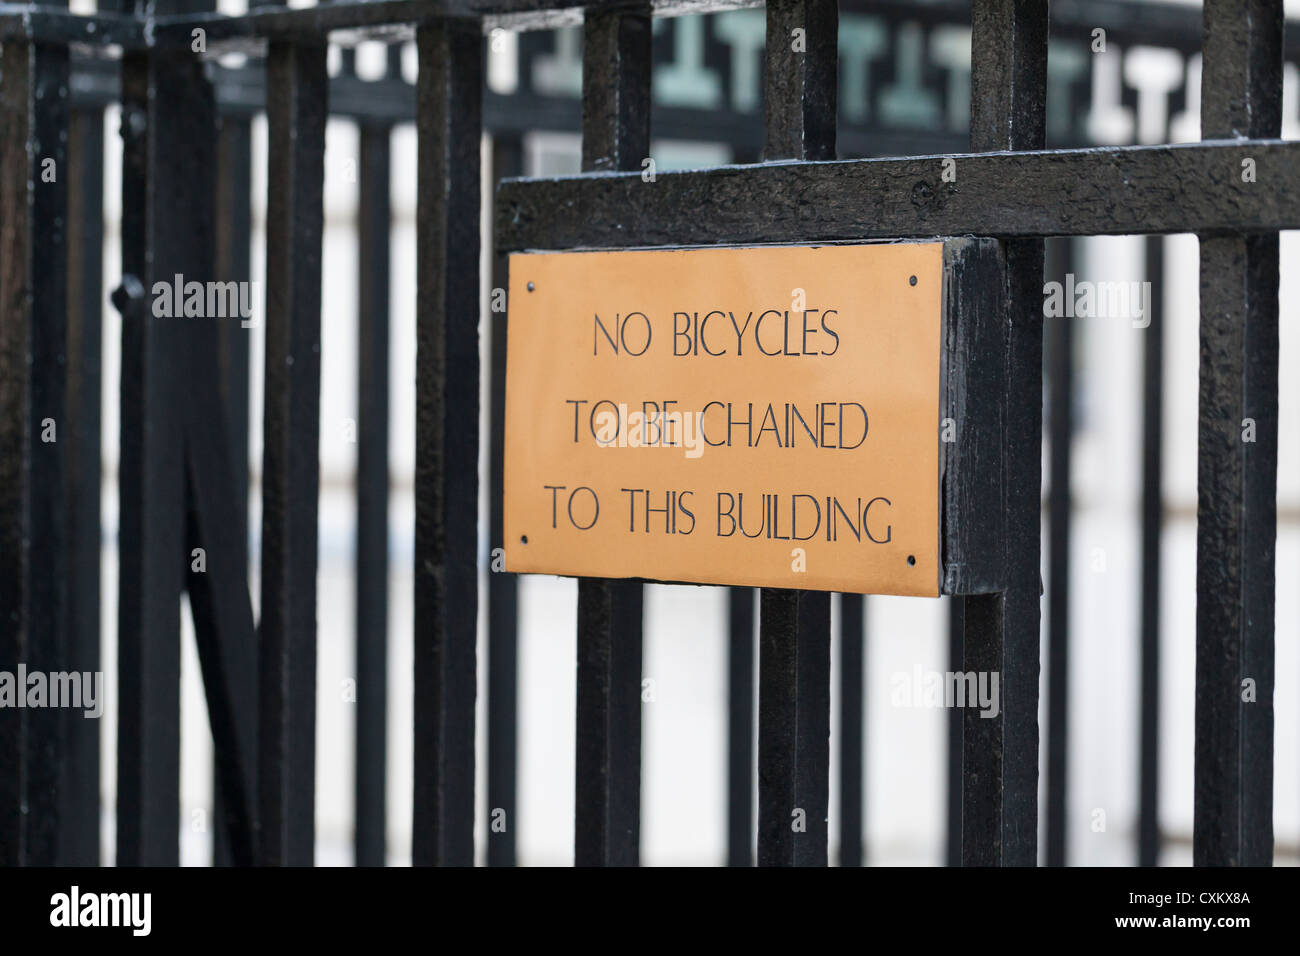 Do not chain bicycle to these railings notice in central London, England Stock Photo